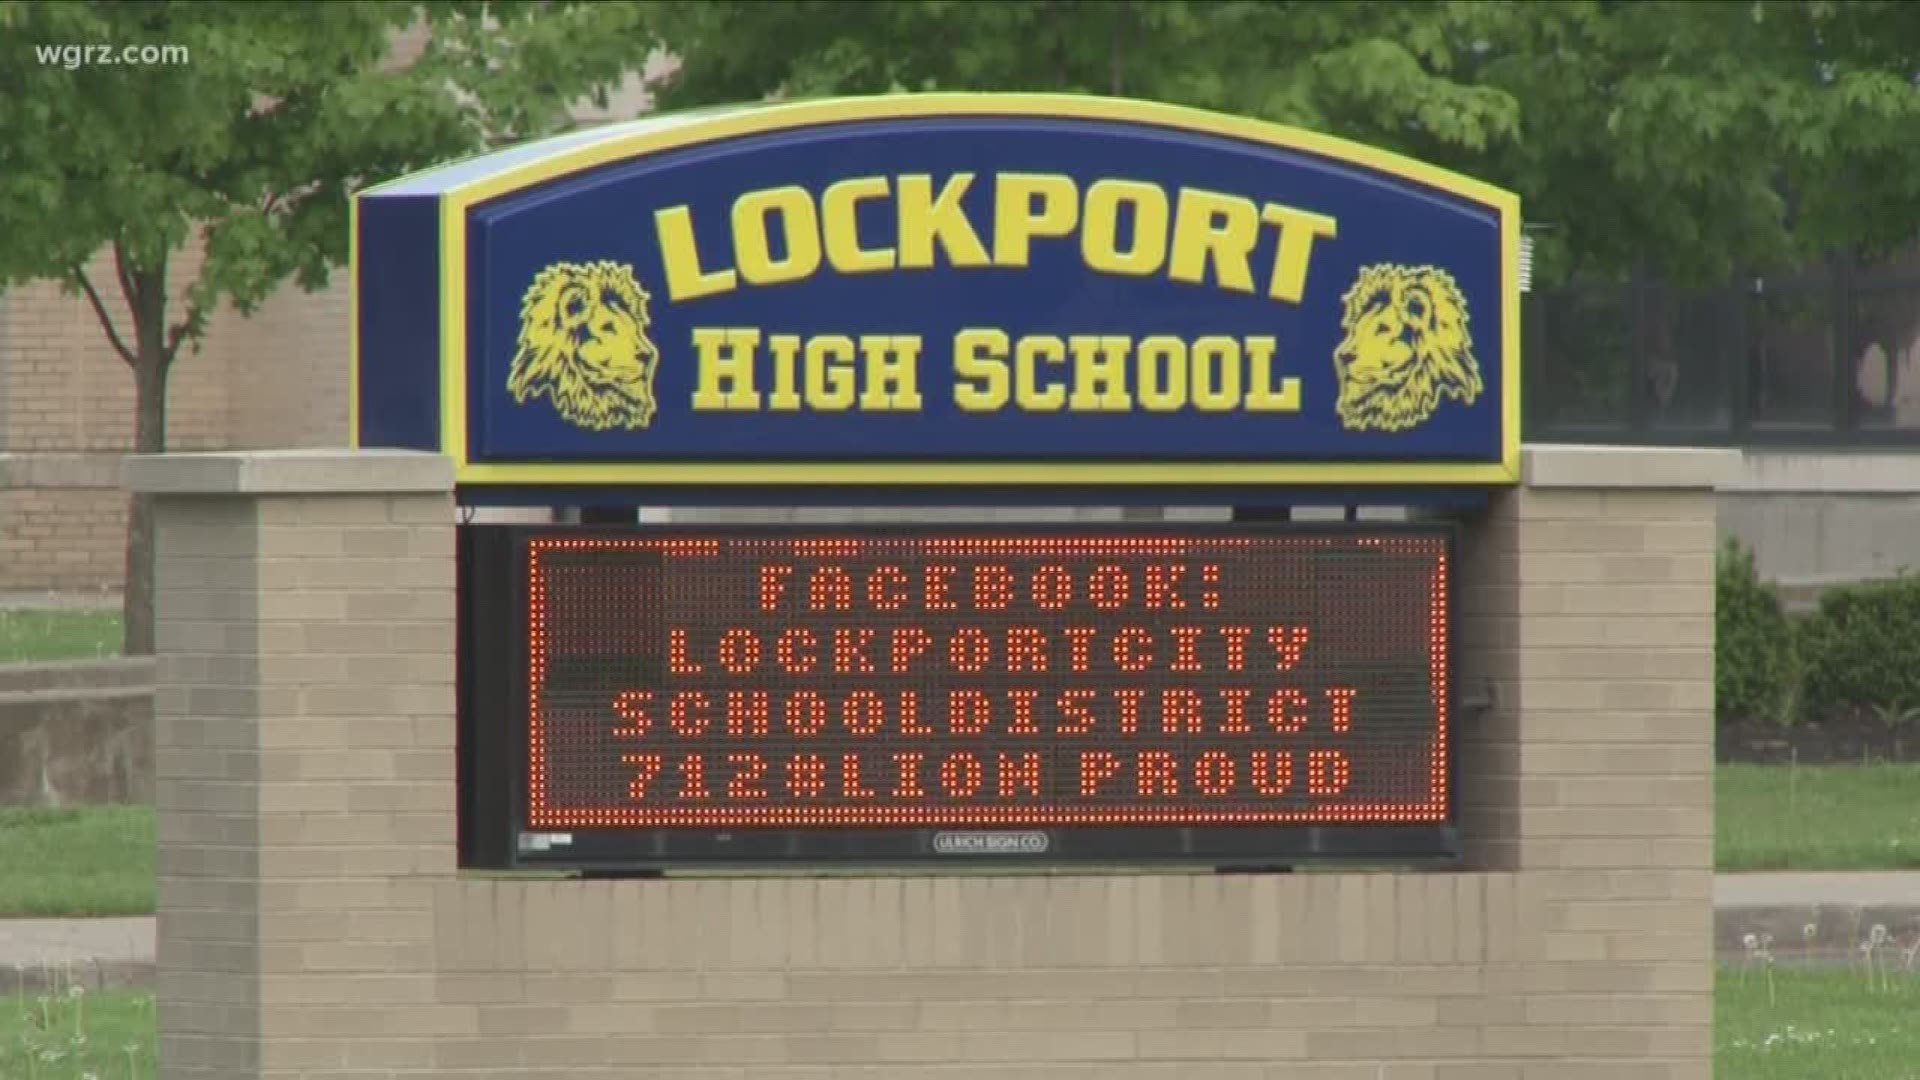 The State Education Department plans to meet with Lockport City School officials this week about its use of facial recognition technology.